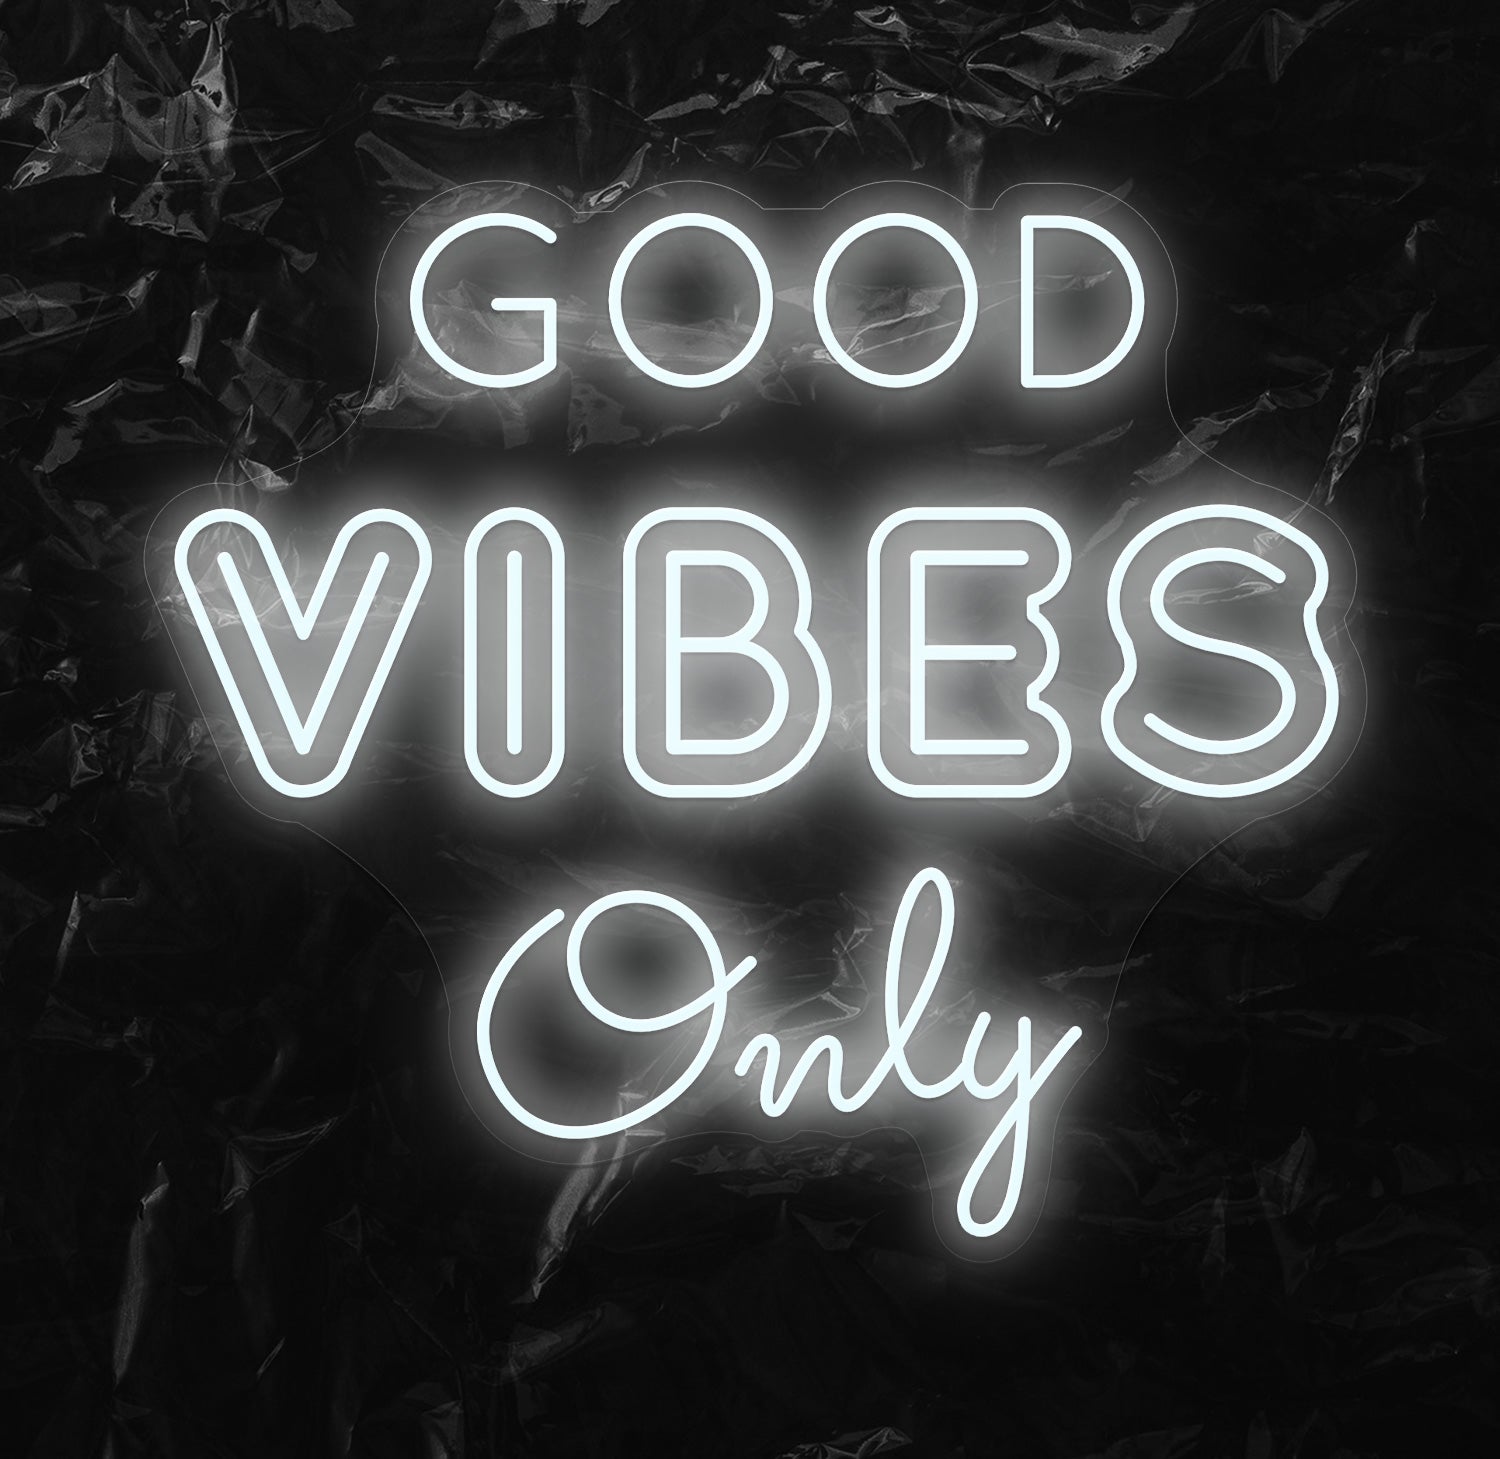 " Good Vibes Only " LED Neonschild - NEONEVERGLOW